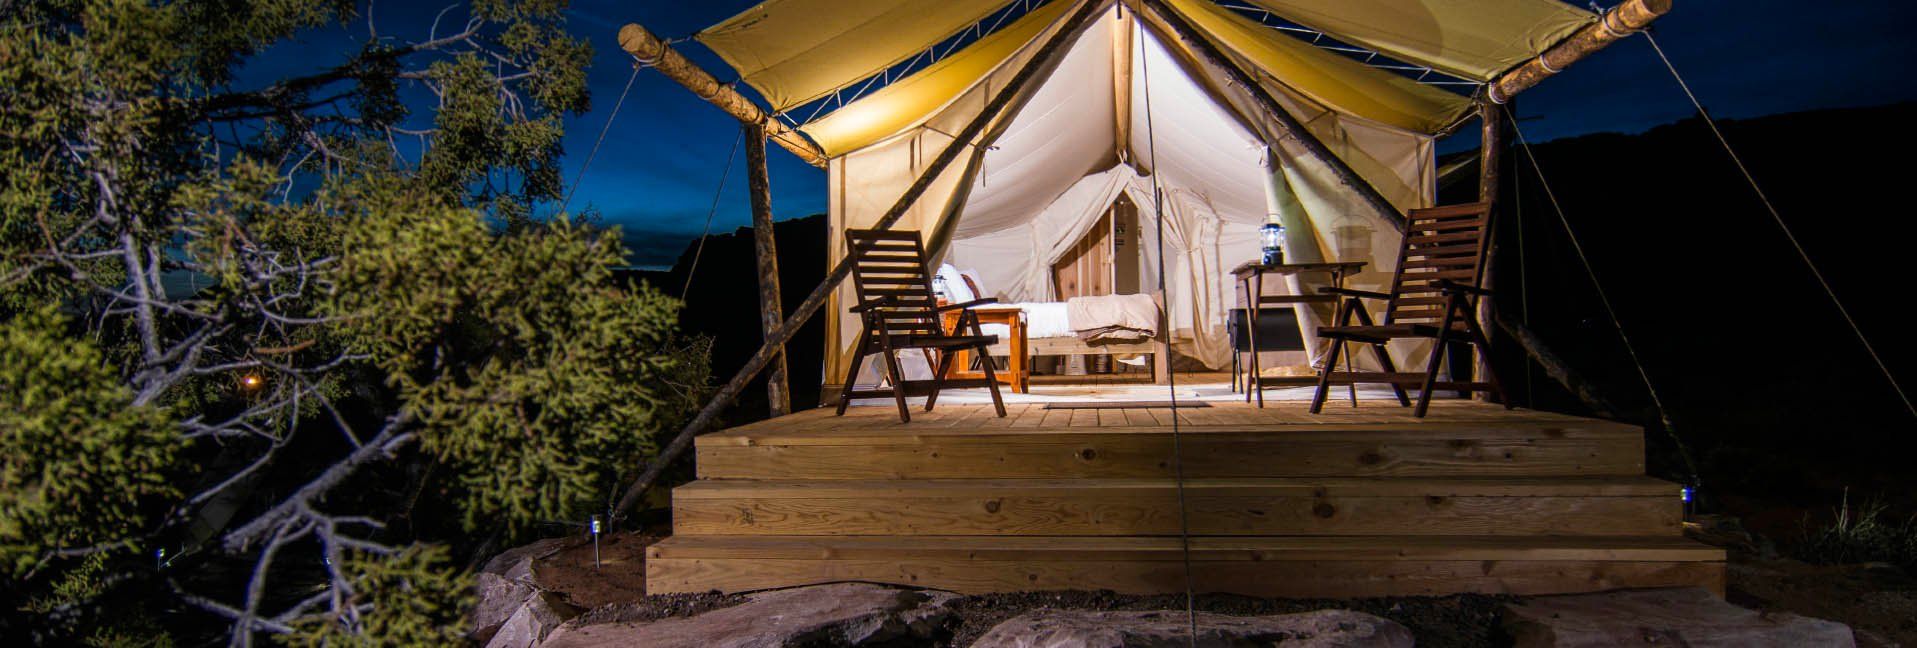 Going Glamping, An elegant twist on outdoor life